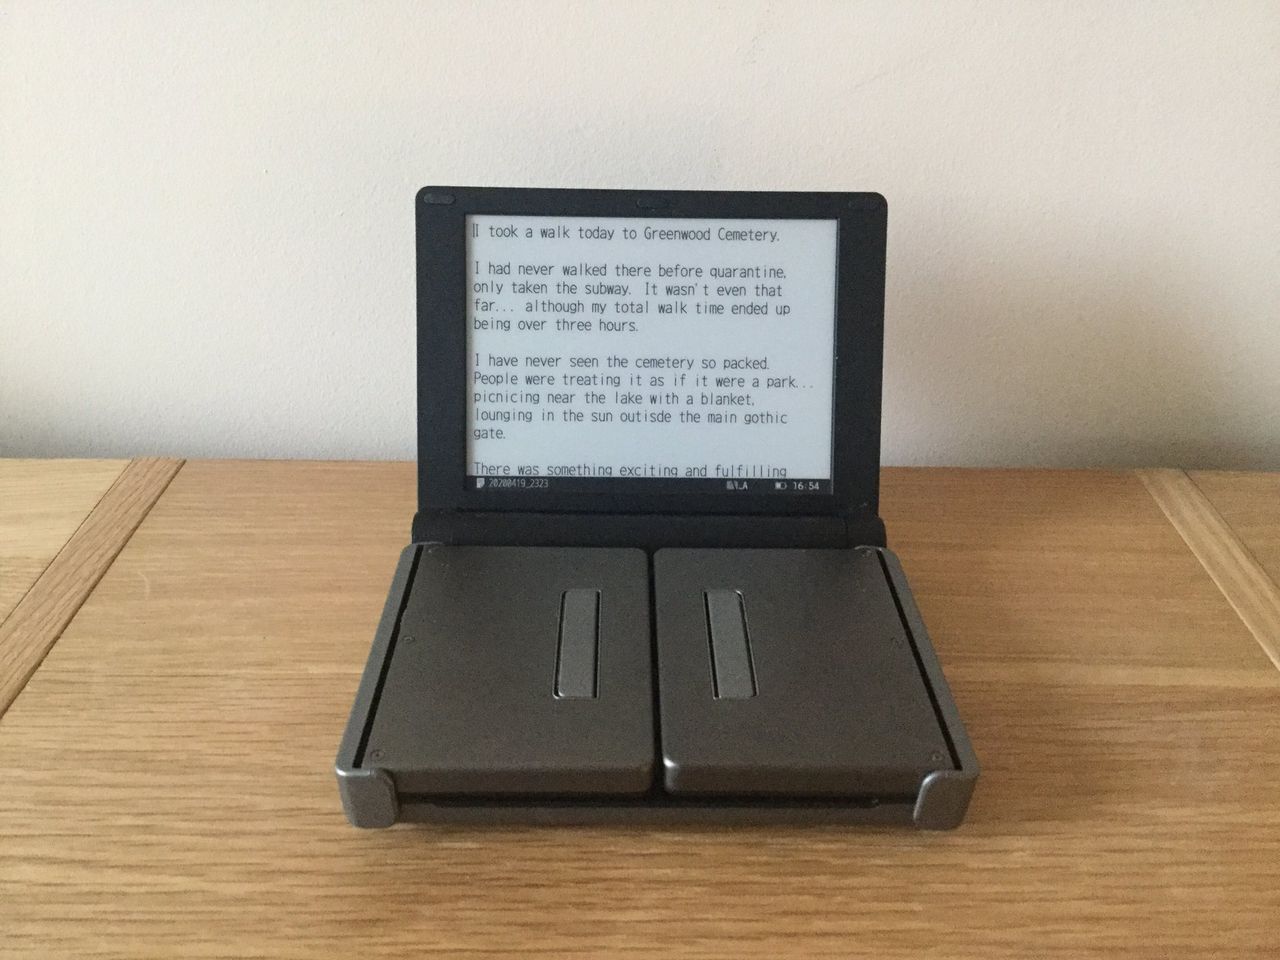 The Pomera DM30 on a wooden surface, partially unfolded but hiding its keyboard. It has text on it, starting with 'I took a walk today to Greenwood Cemetery...'